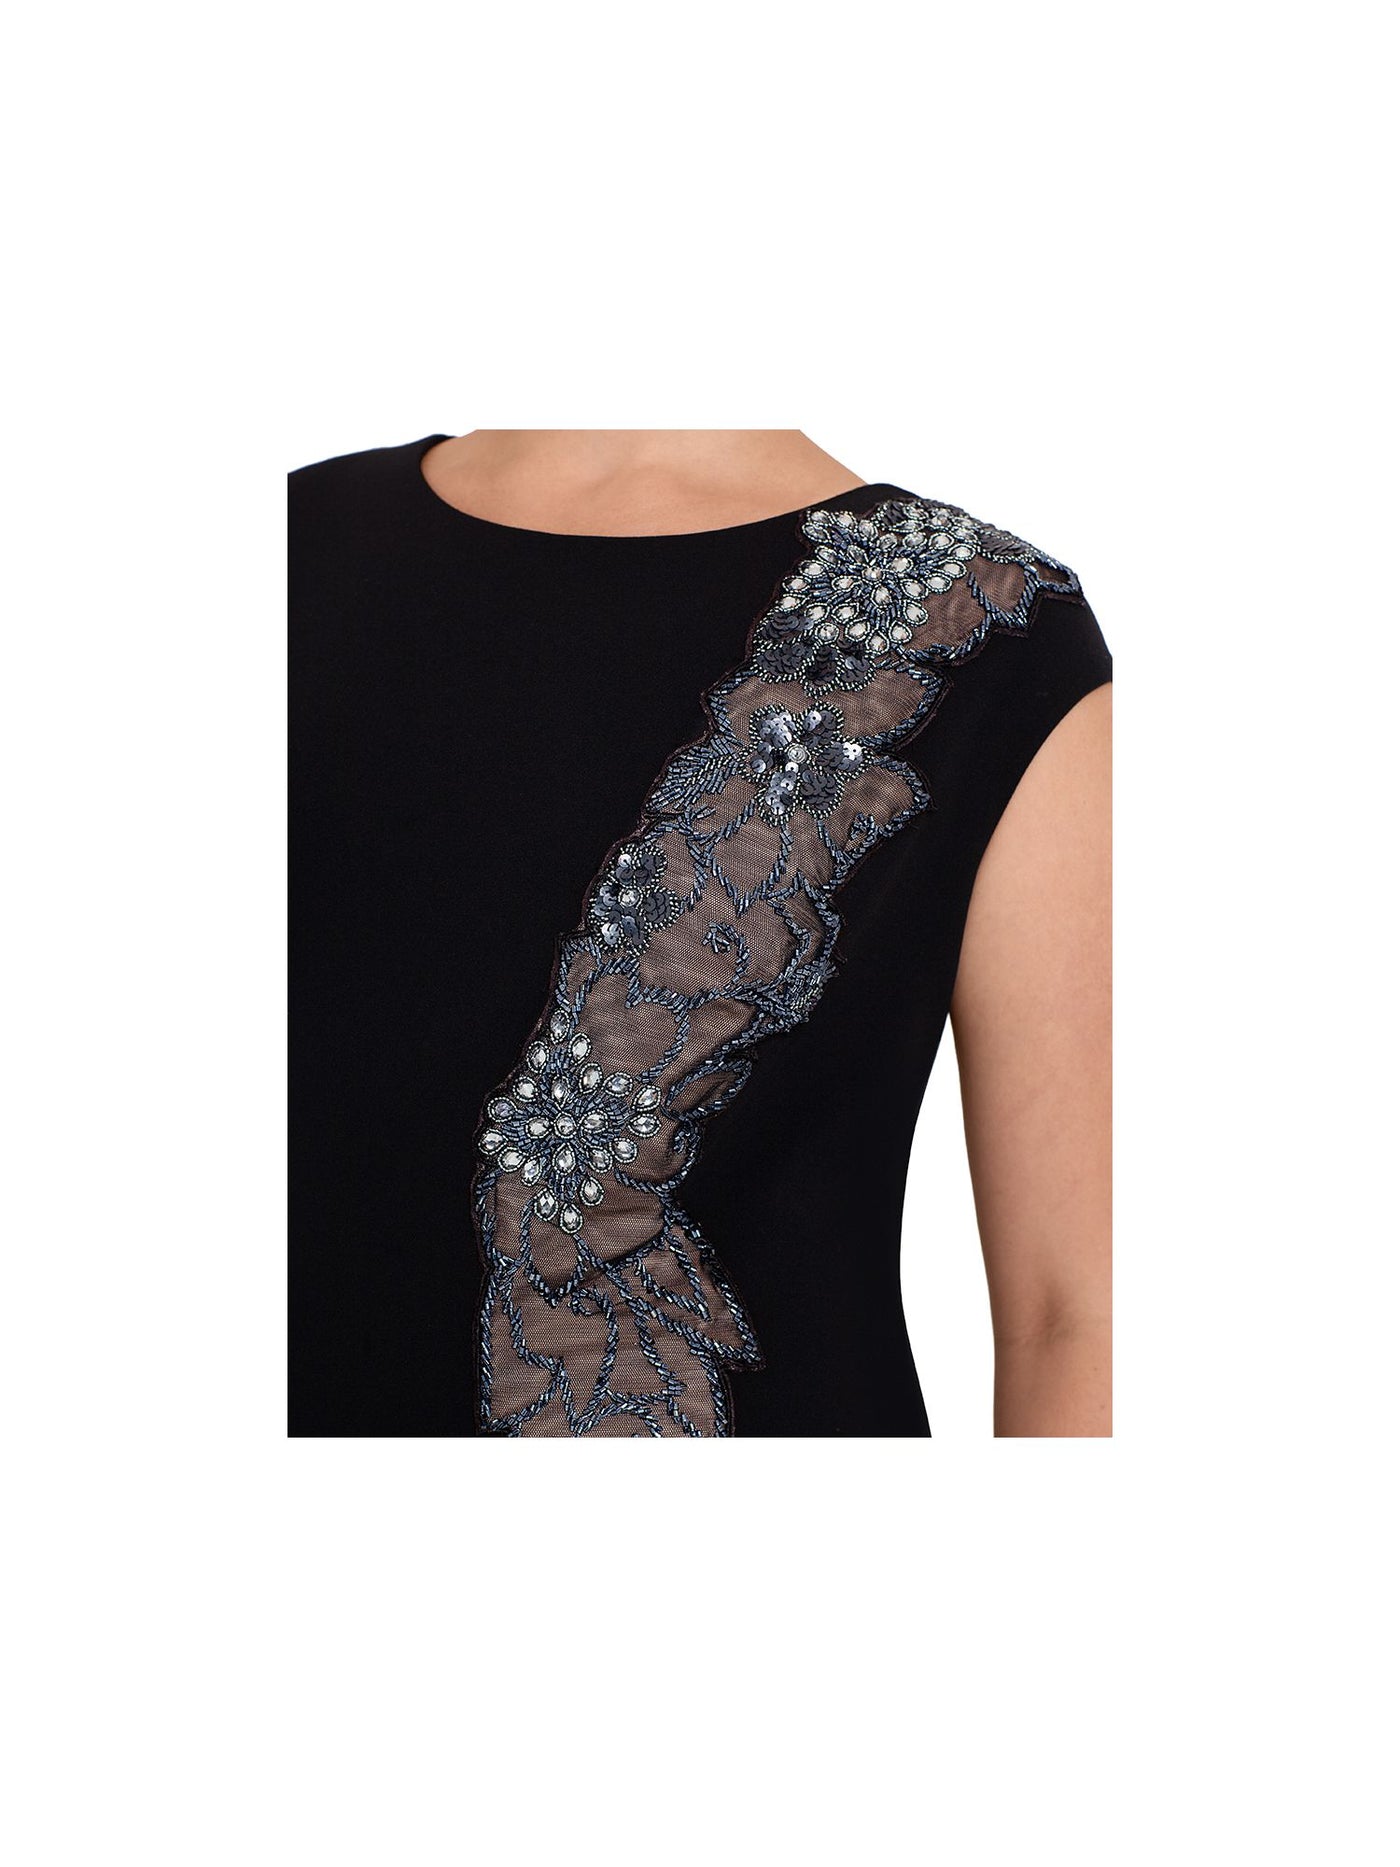 XSCAPE Womens Embellished Sequined Cap Sleeve Jewel Neck Above The Knee Evening Body Con Dress